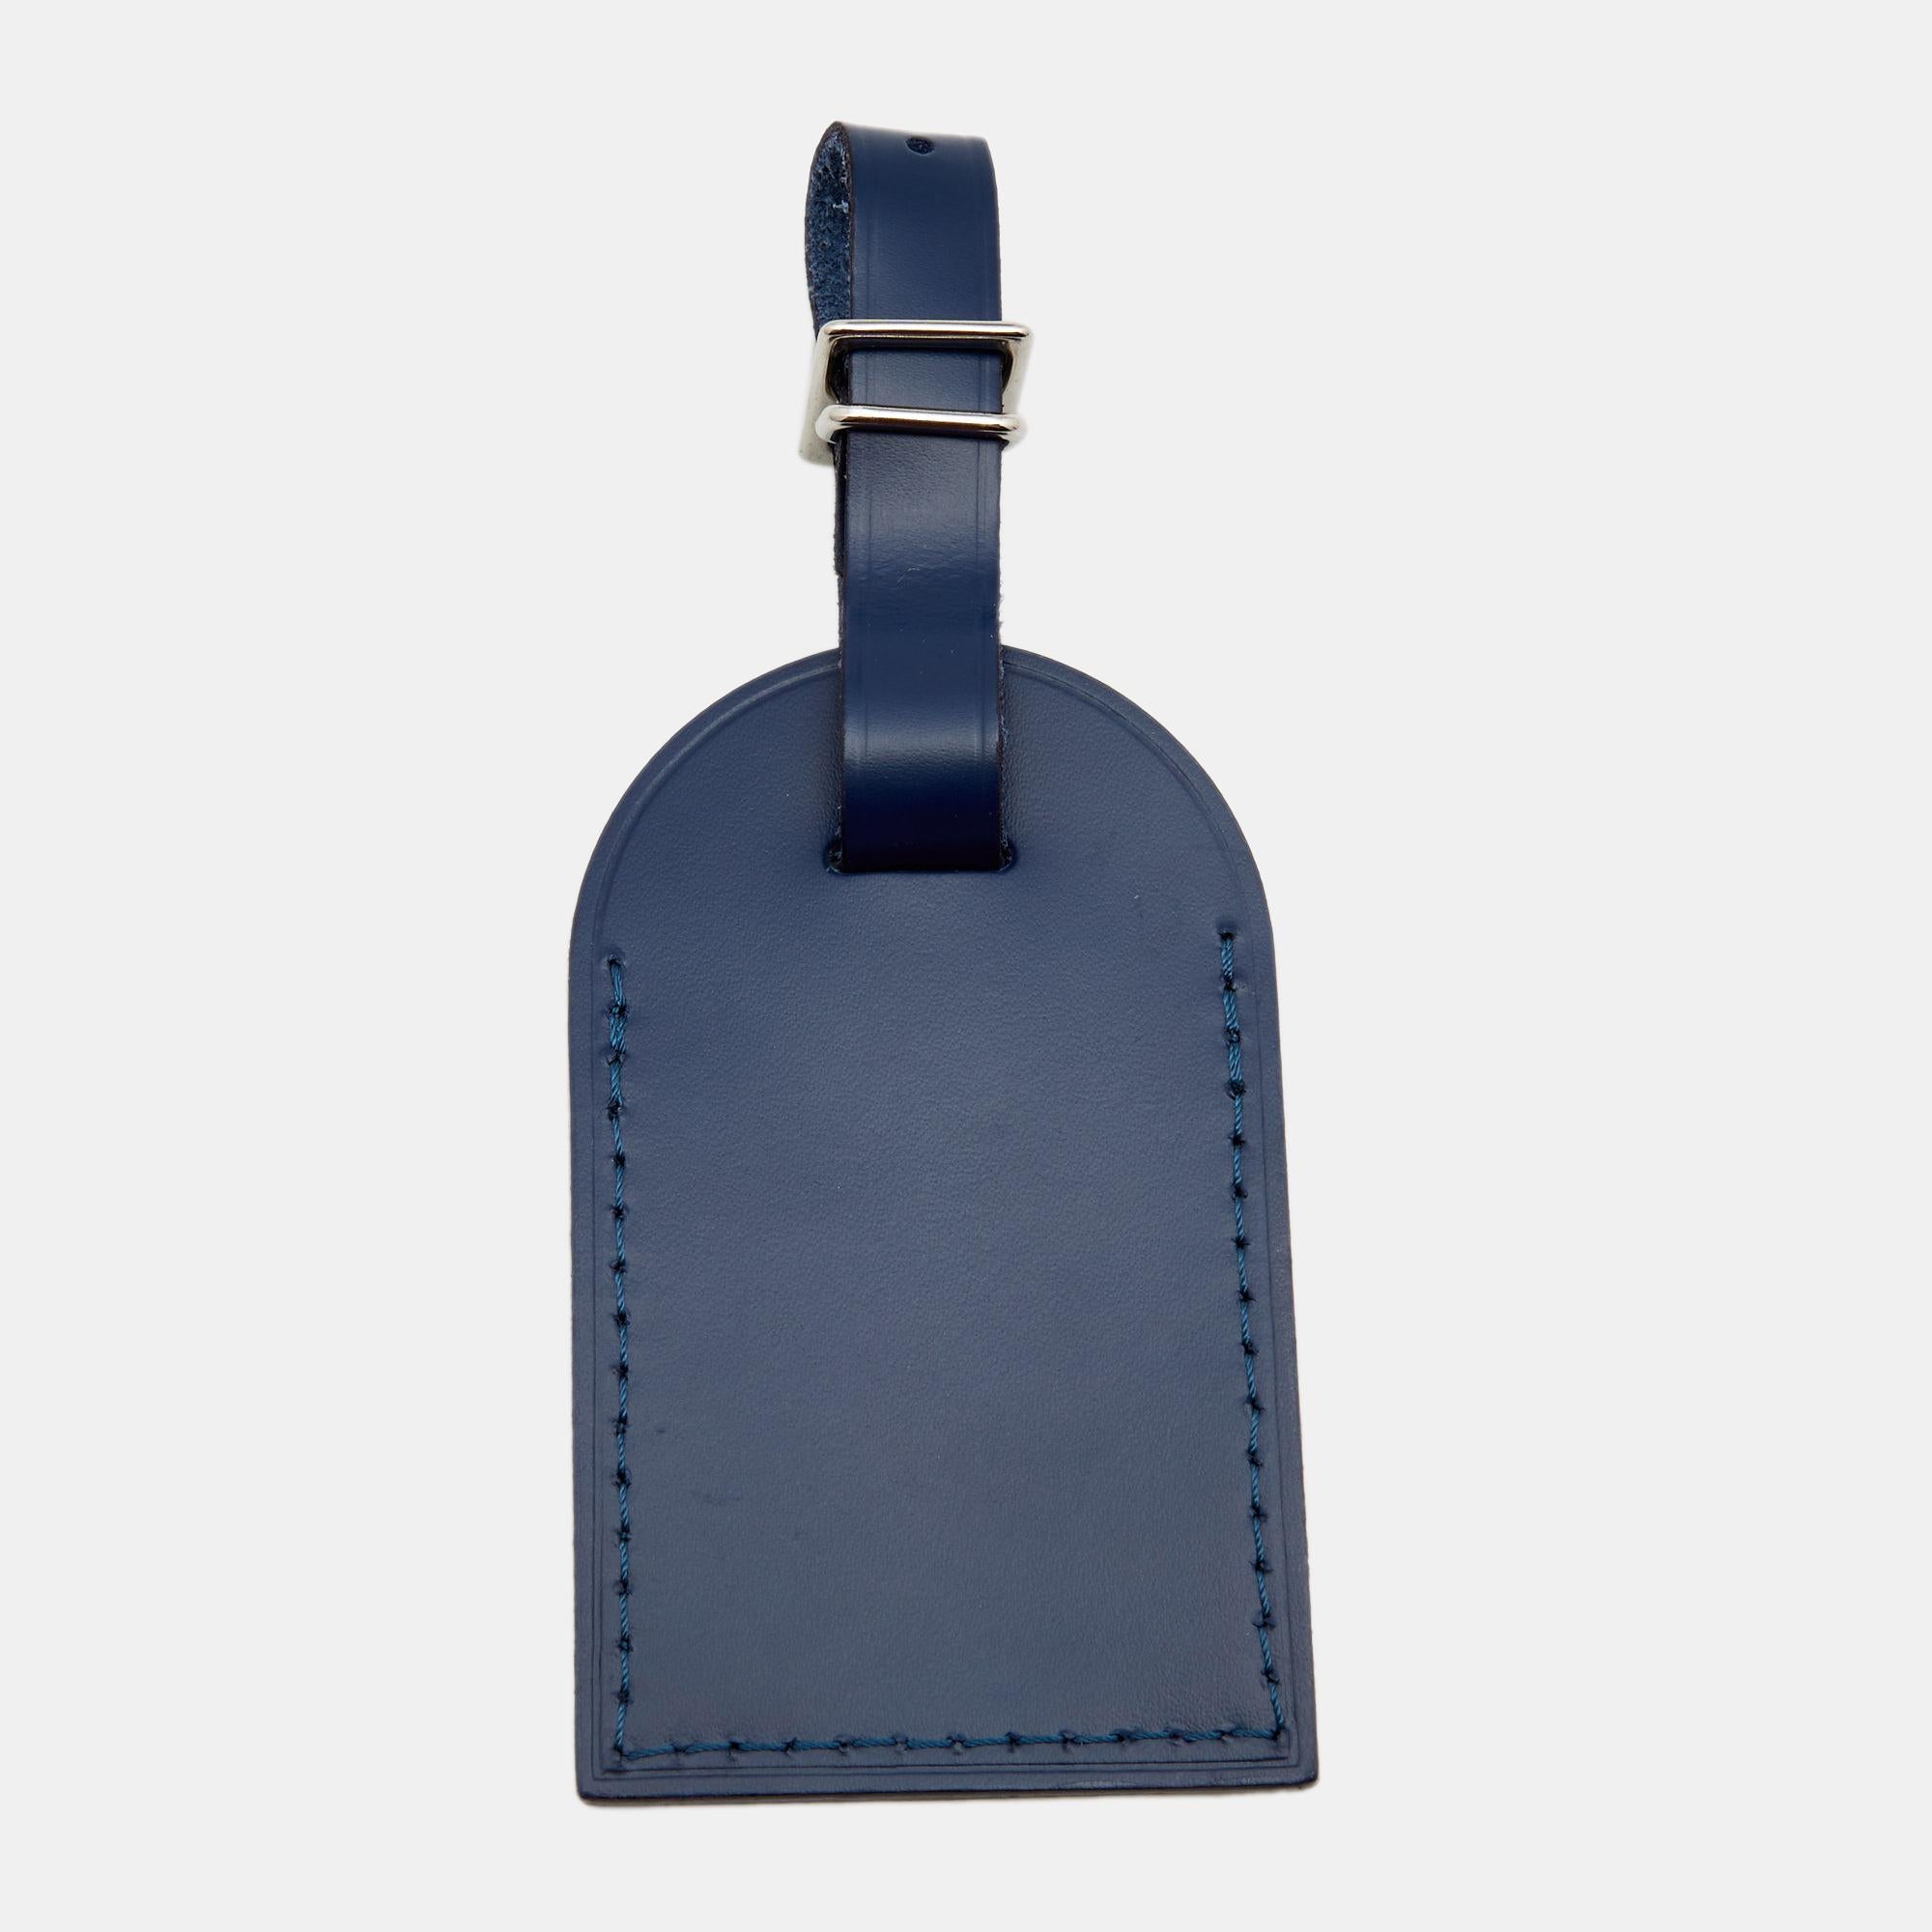 Rendered in leather, this luggage tag from Louis Vuitton will elevate the looks of your chic travel bags. It is designed in a simple shape with just the brand name on the front. It is complete with a leather strap holding a buckle. Keep your bags